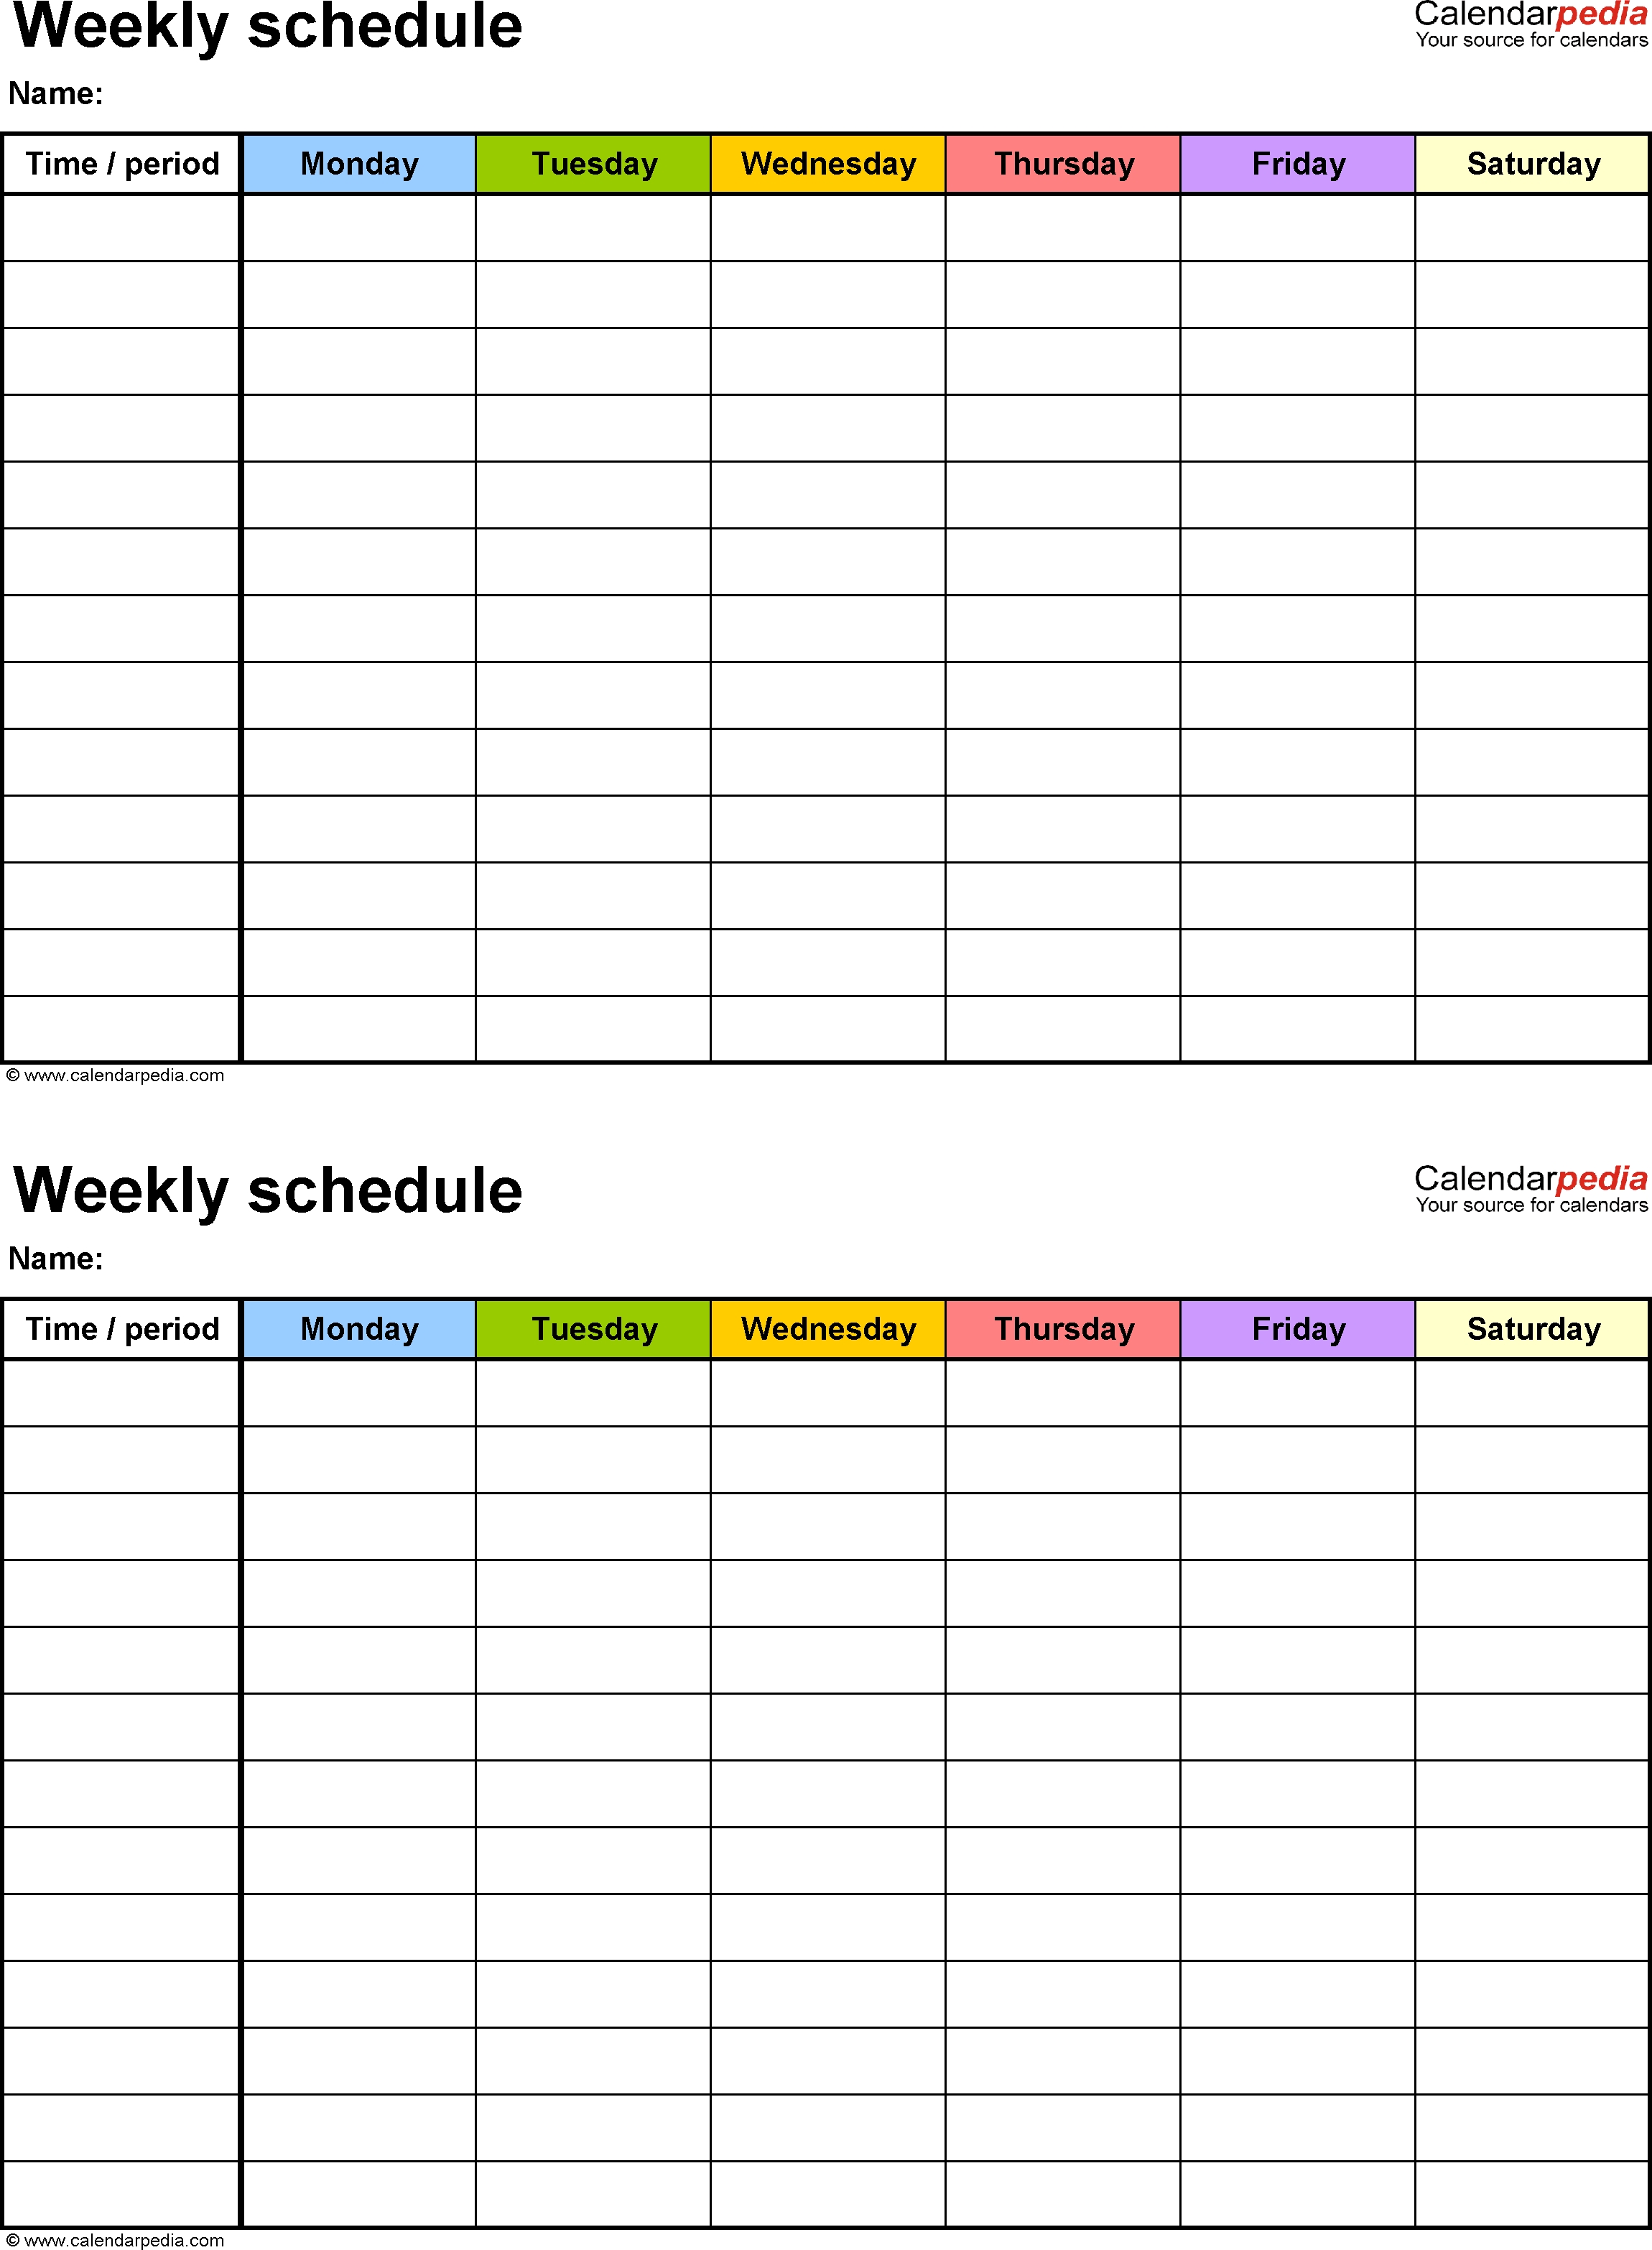 Free Weekly Schedule Templates For Excel - 18 Templates within Blank 5 Day School Timetable